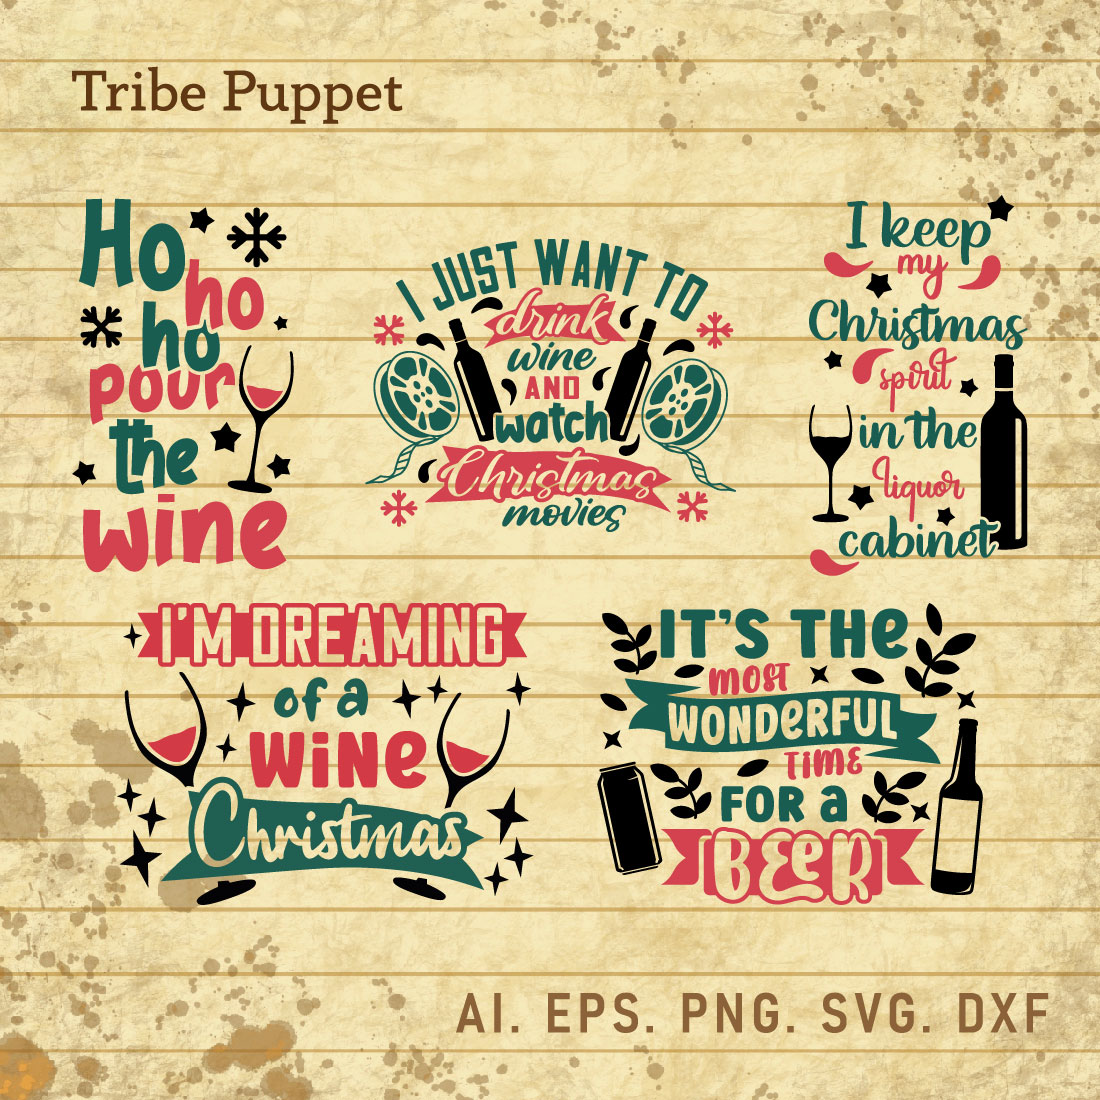 5 Christmas Drinking Quotes Bundle cover image.